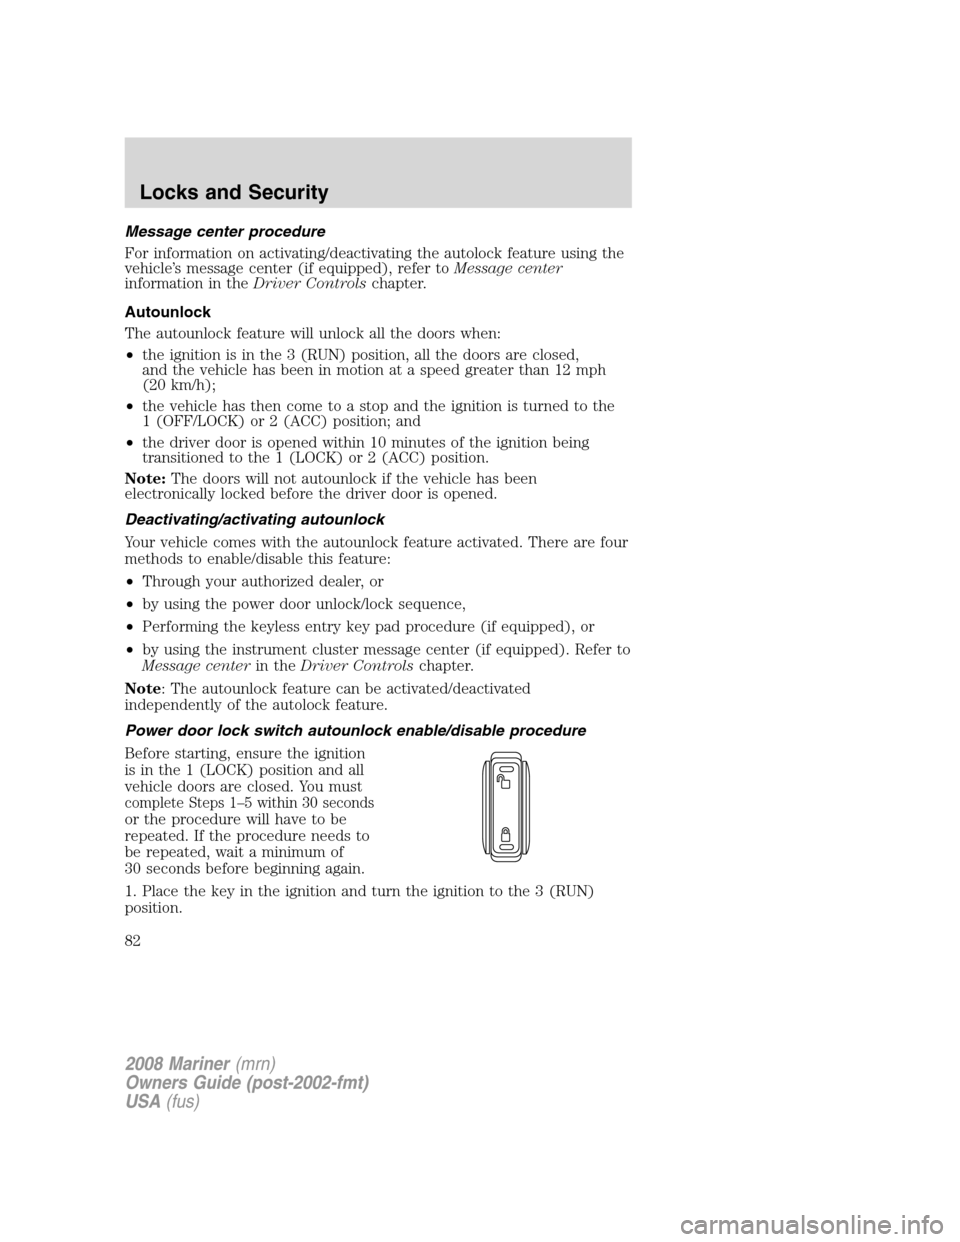 Mercury Mariner 2008  Owners Manuals Message center procedure
For information on activating/deactivating the autolock feature using the
vehicle’s message center (if equipped), refer toMessage center
information in theDriver Controlscha